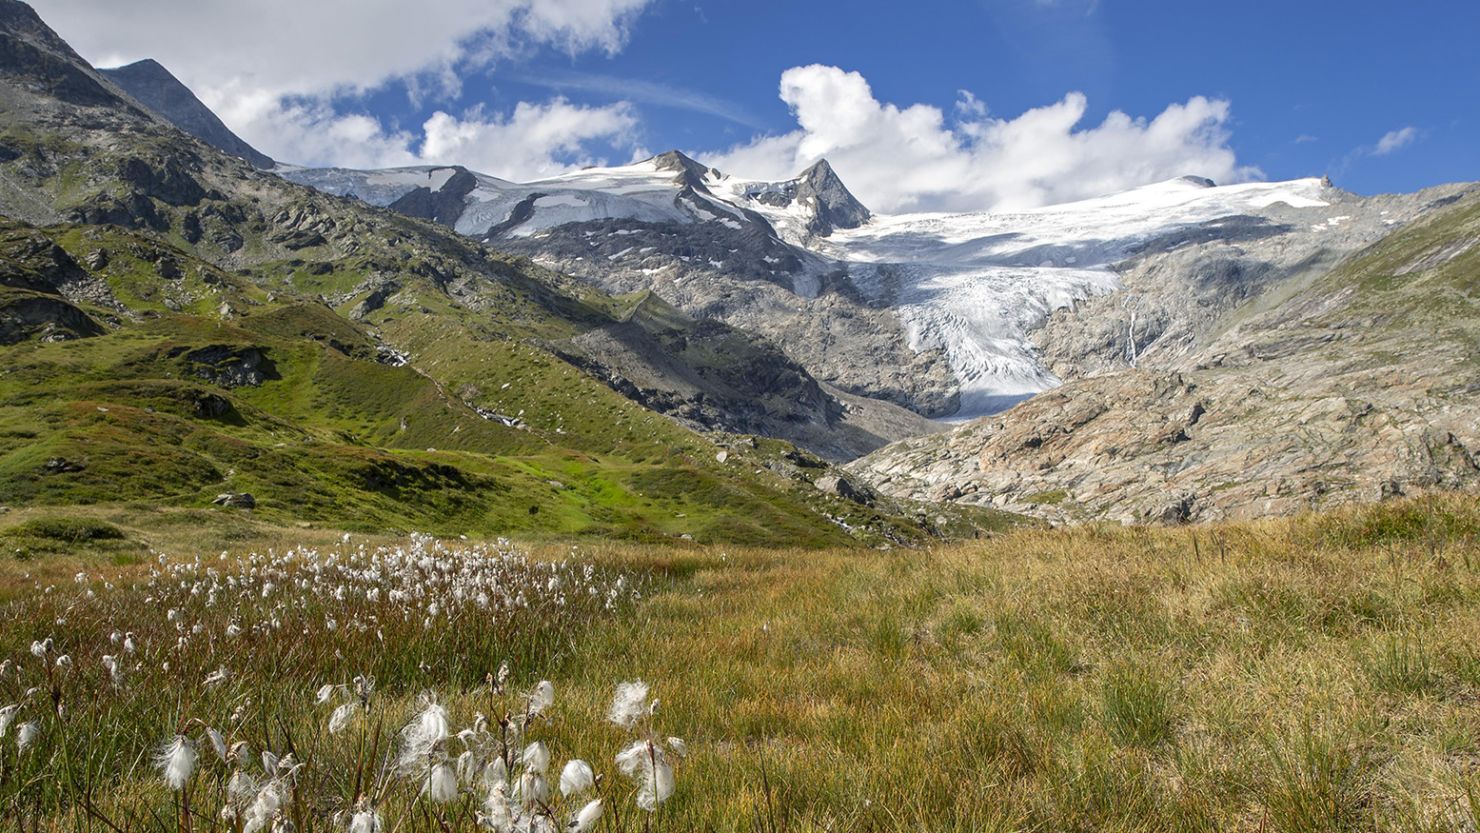 The body was found on the Schlatenkees glacier in East Tyrol, Austria.